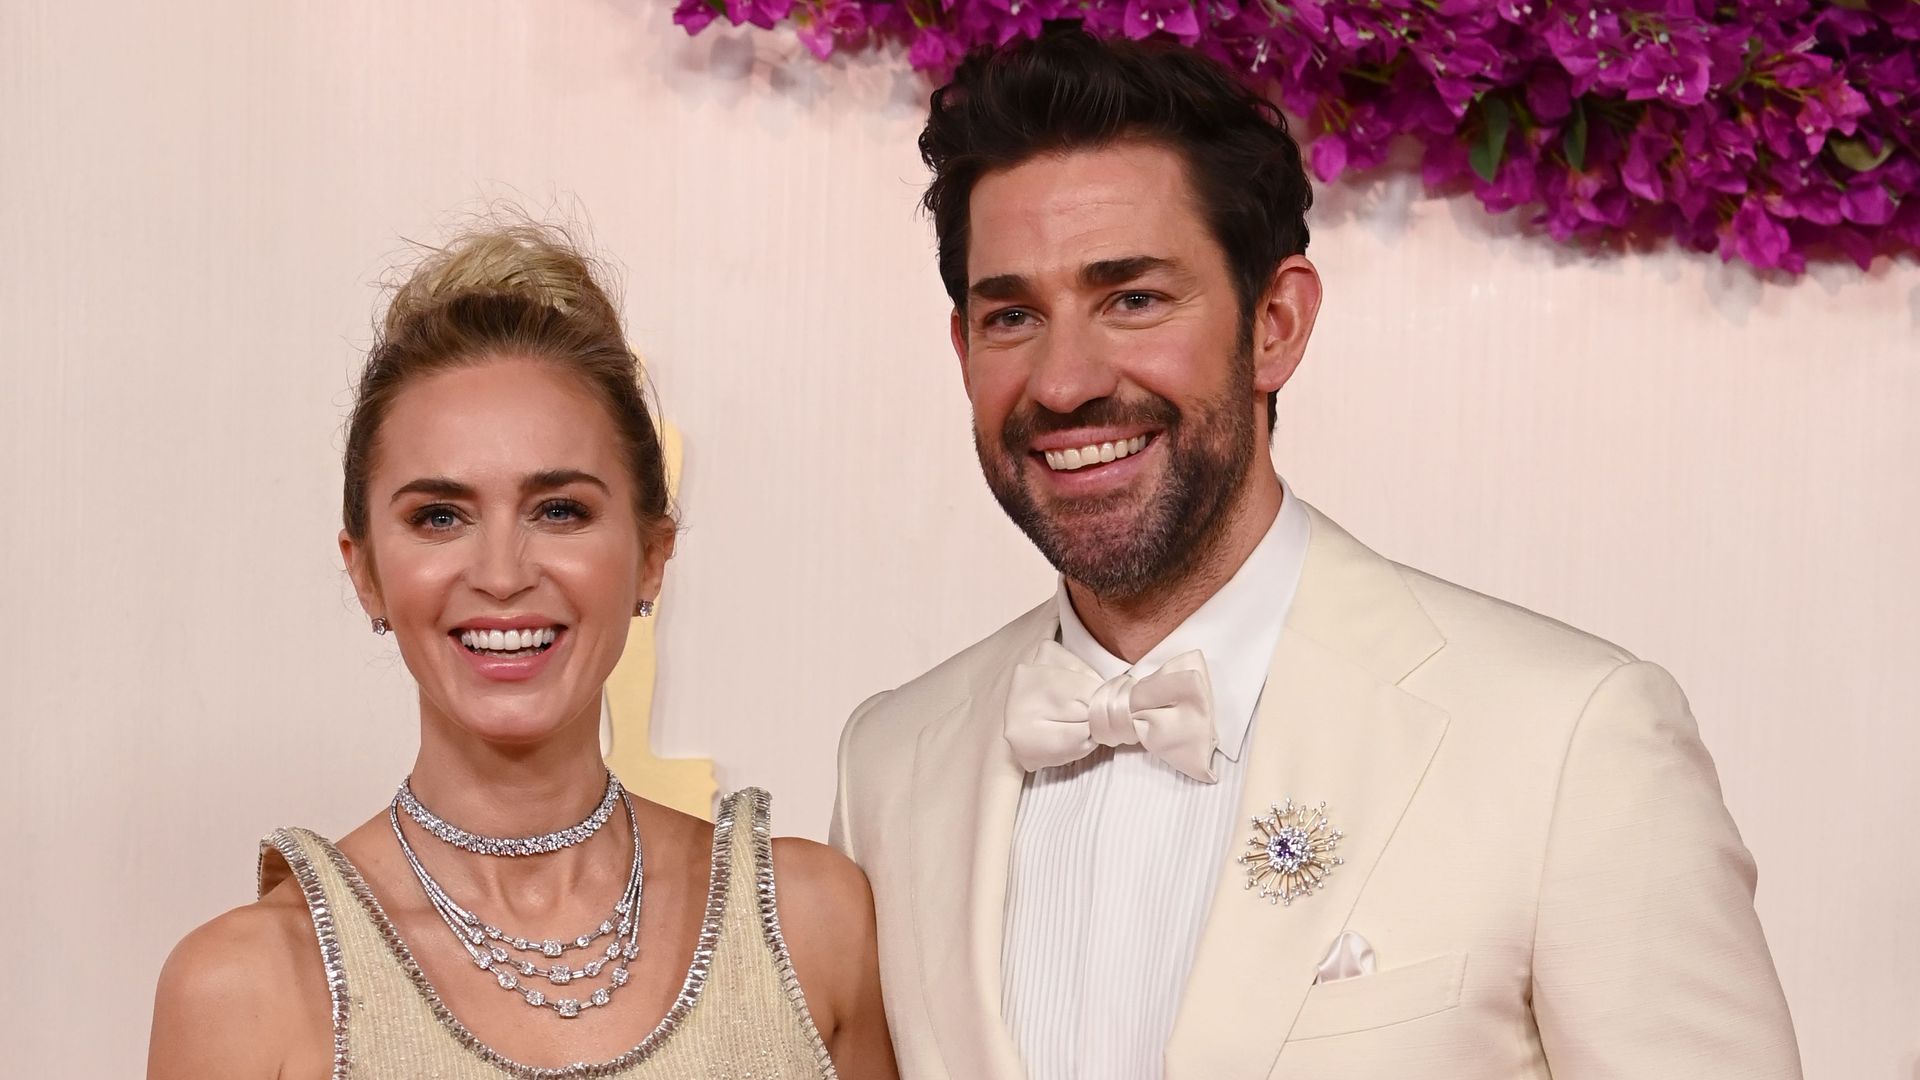 John Krasinski reveals rare details about two daughters he shares with wife Emily Blunt